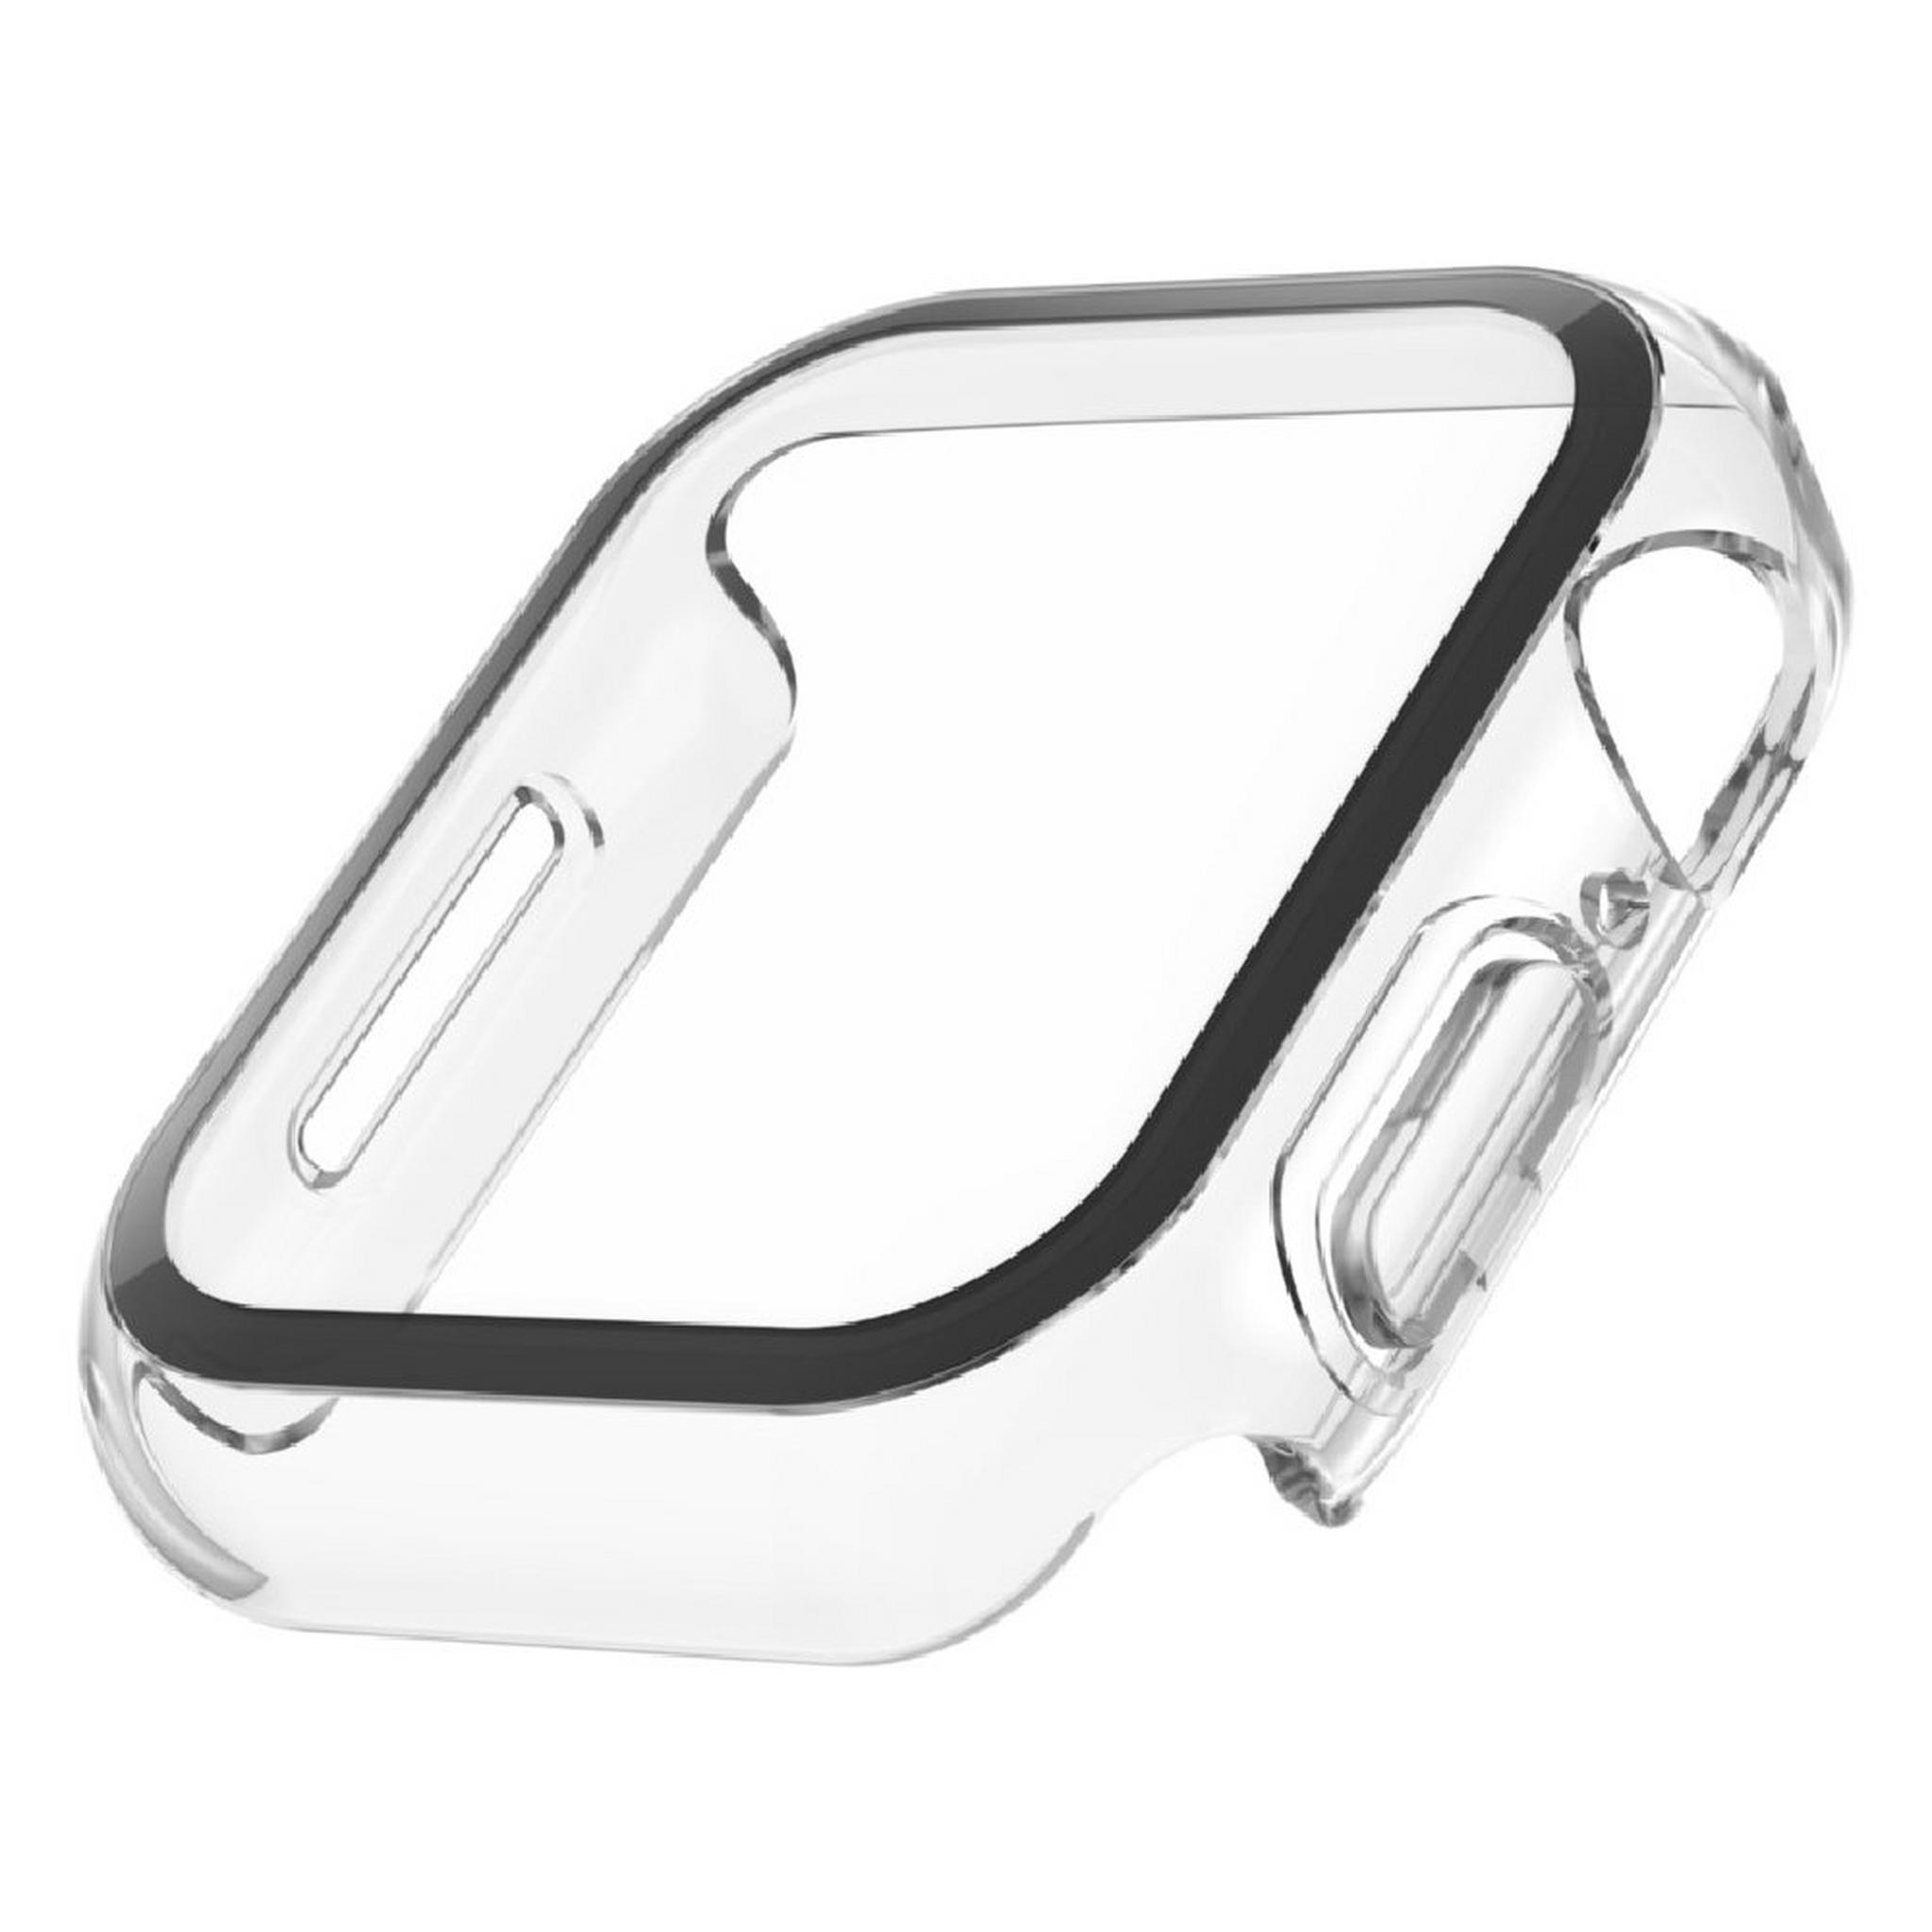 Belkin Apple Watch 41mm Tempered Glass Screen Protector - Clear